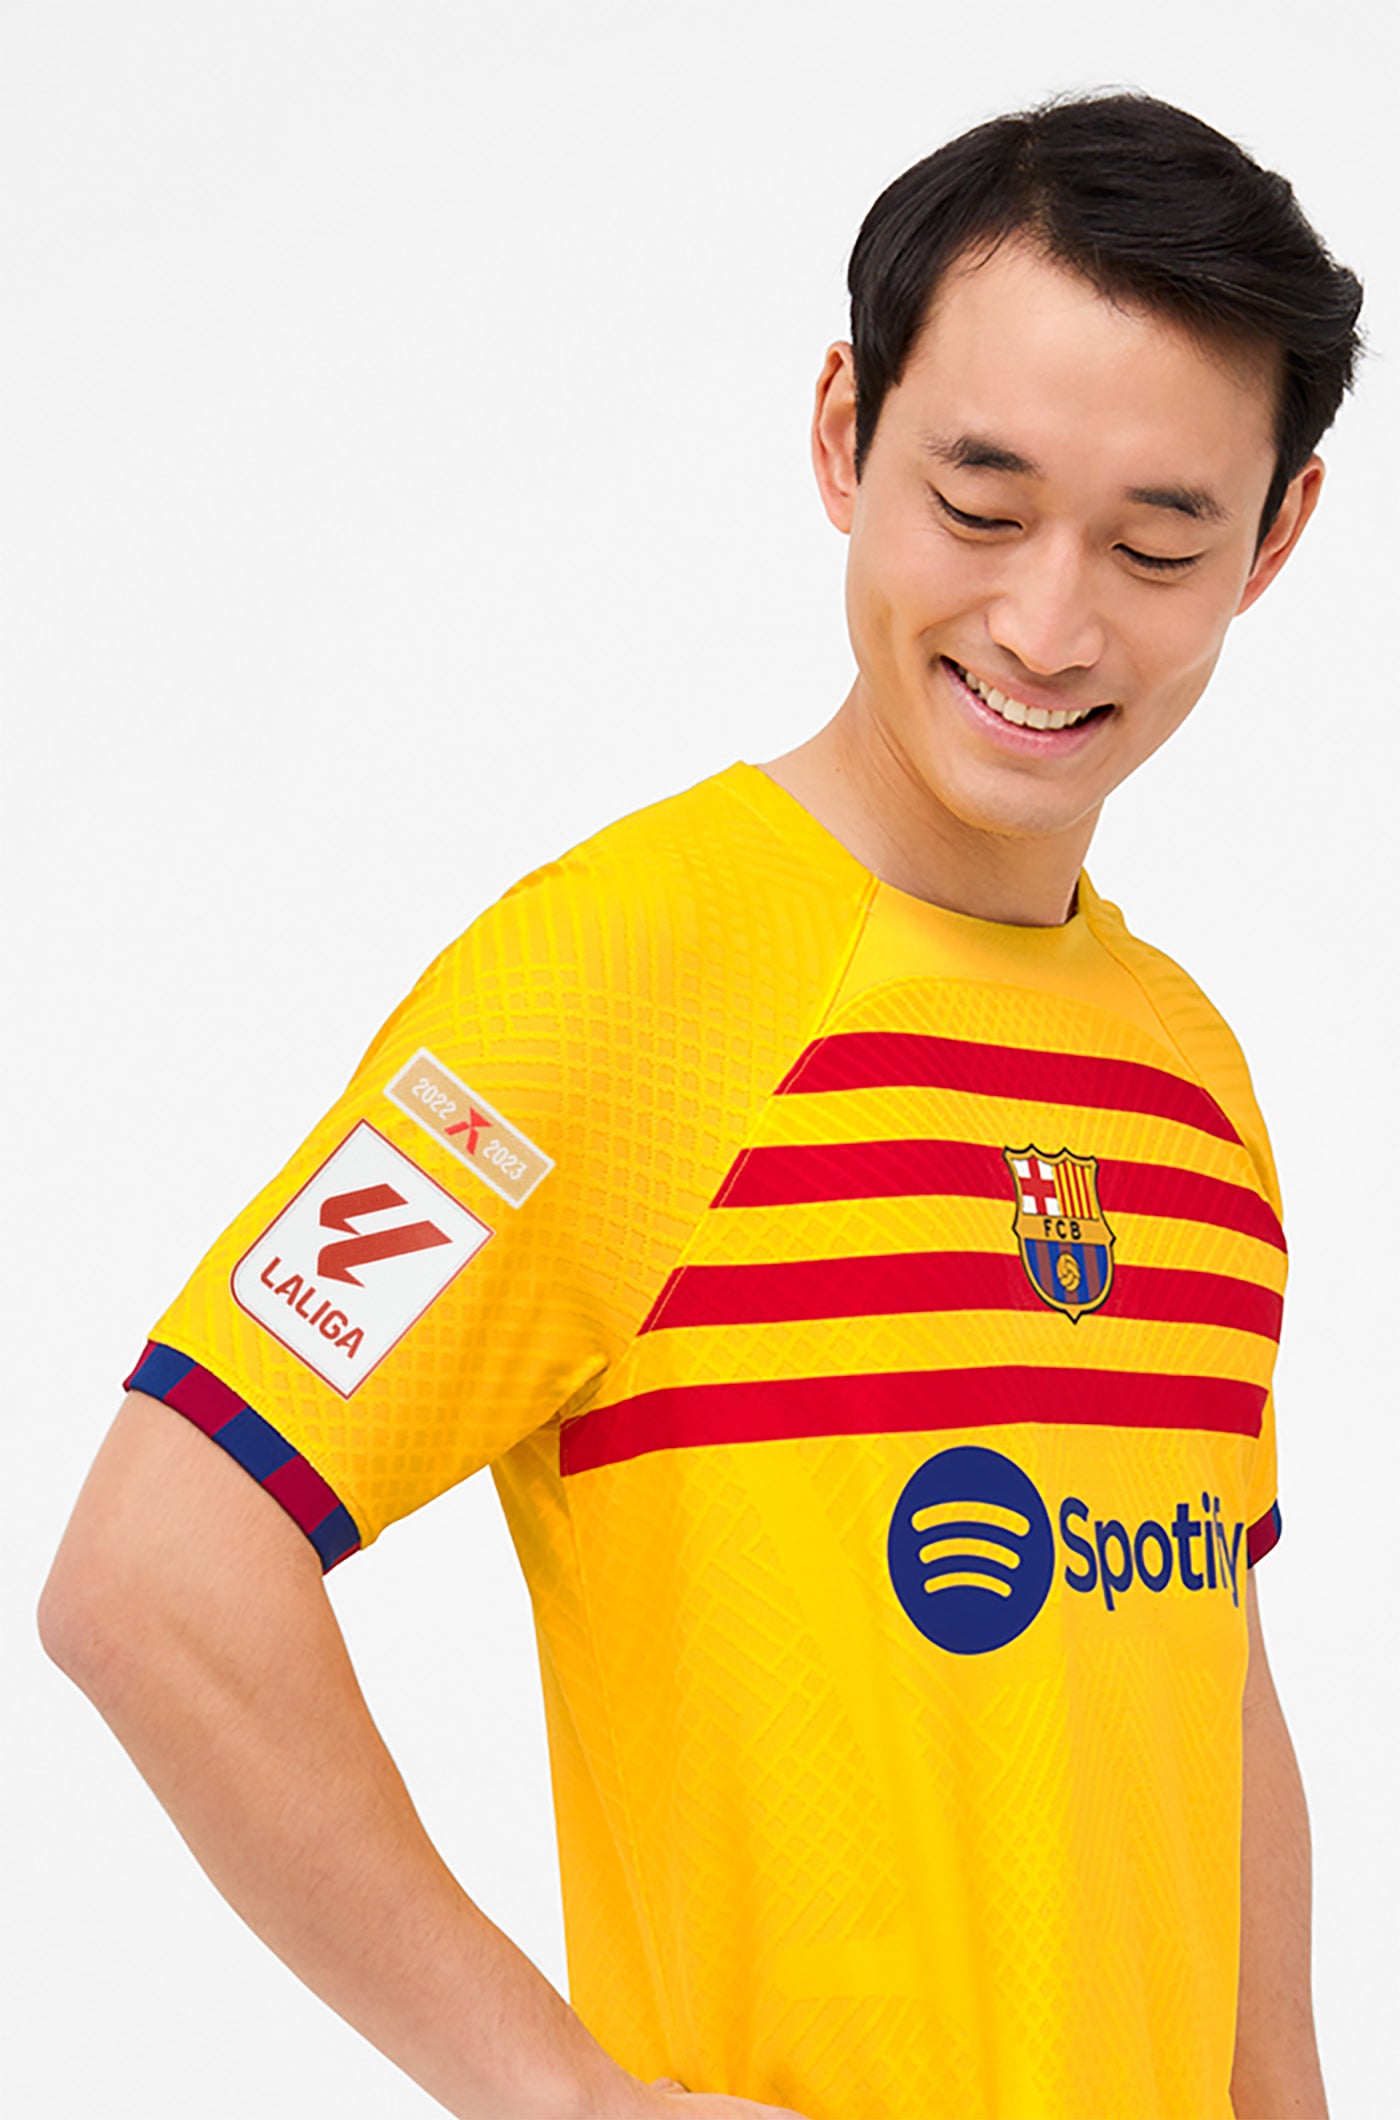 LFP FC Barcelona fourth shirt 23/24 Player’s Edition  - VITOR ROQUE